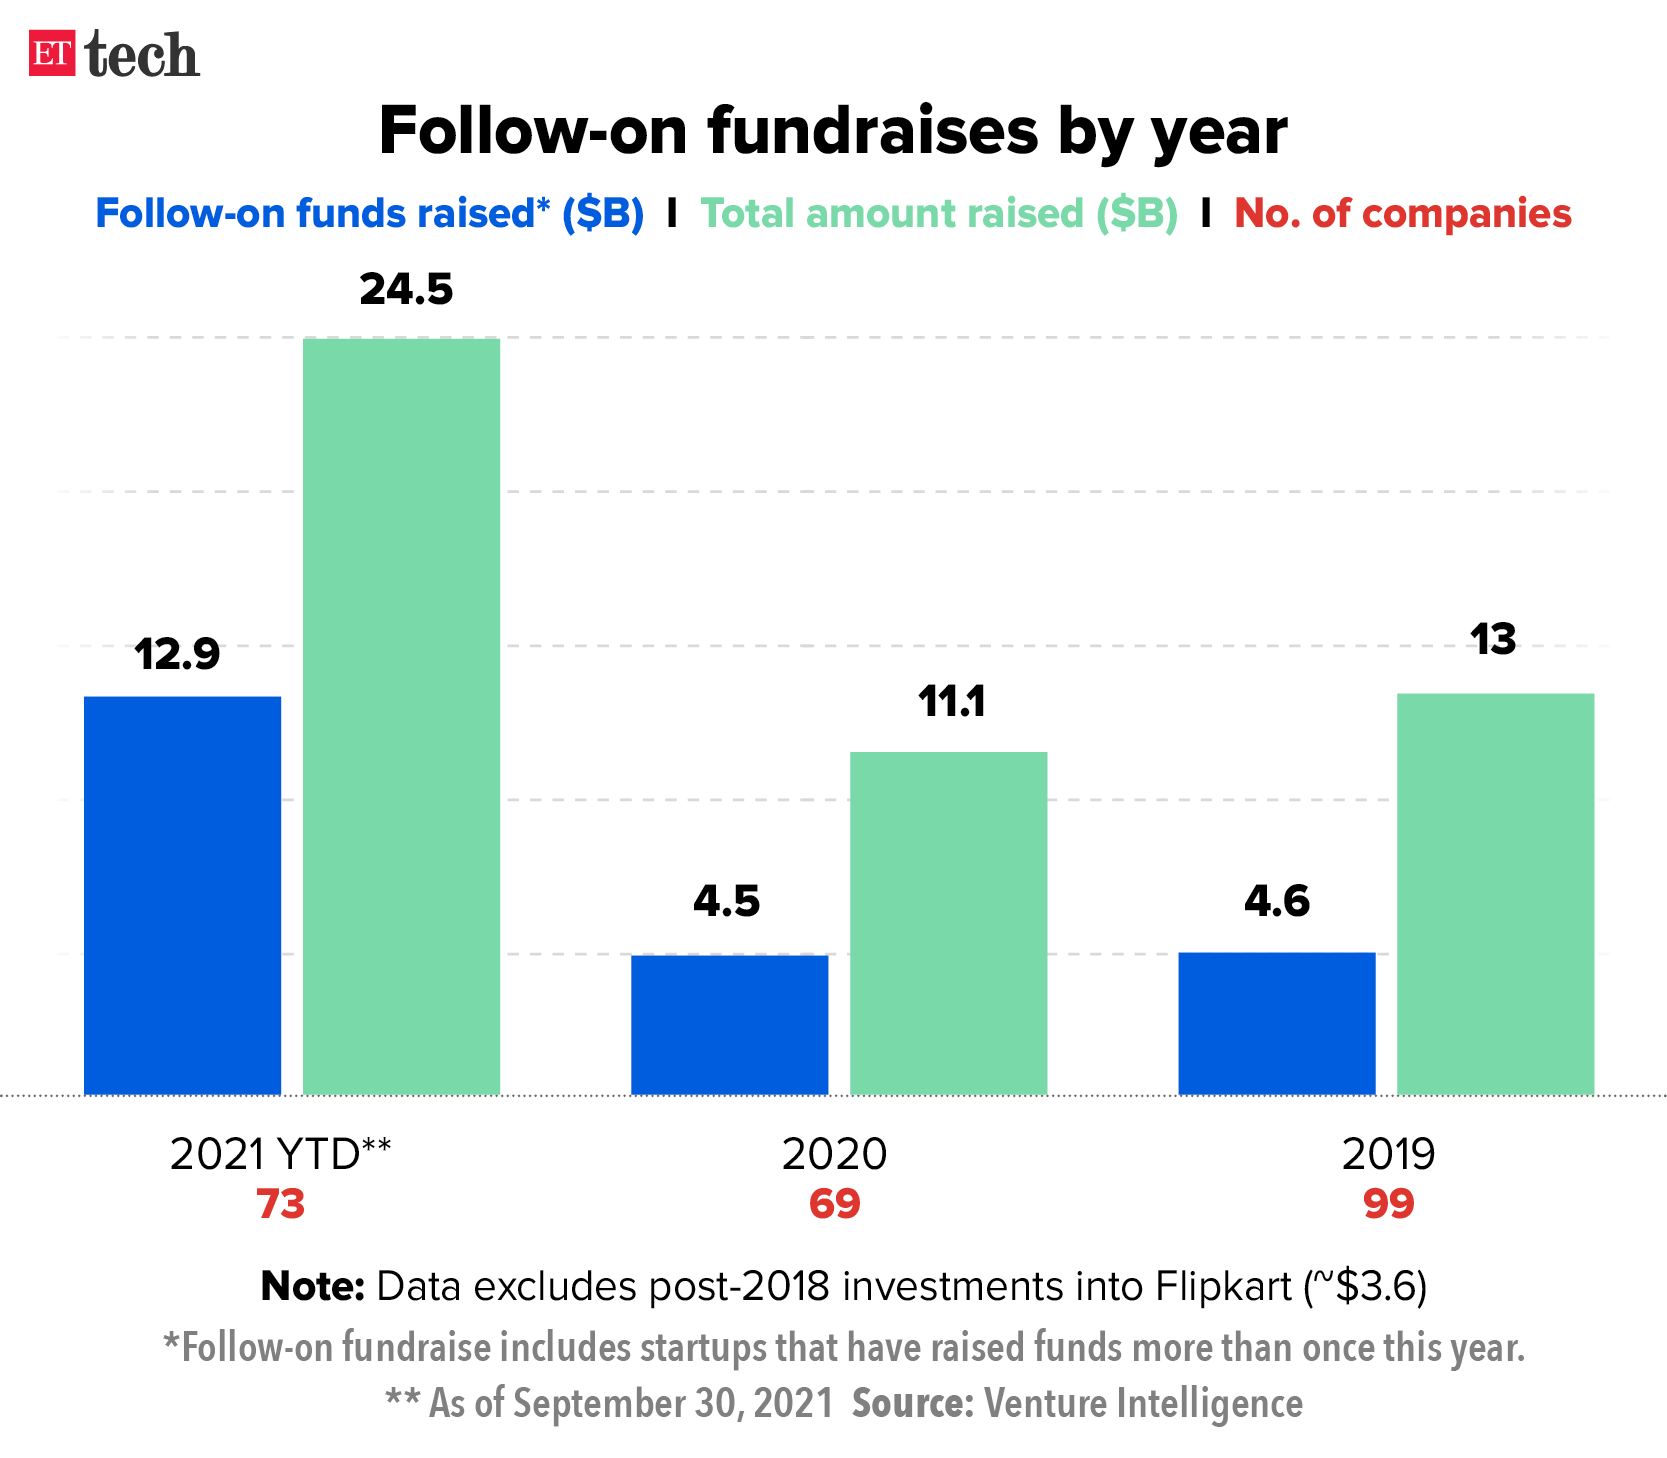 Follow on fundraising by year